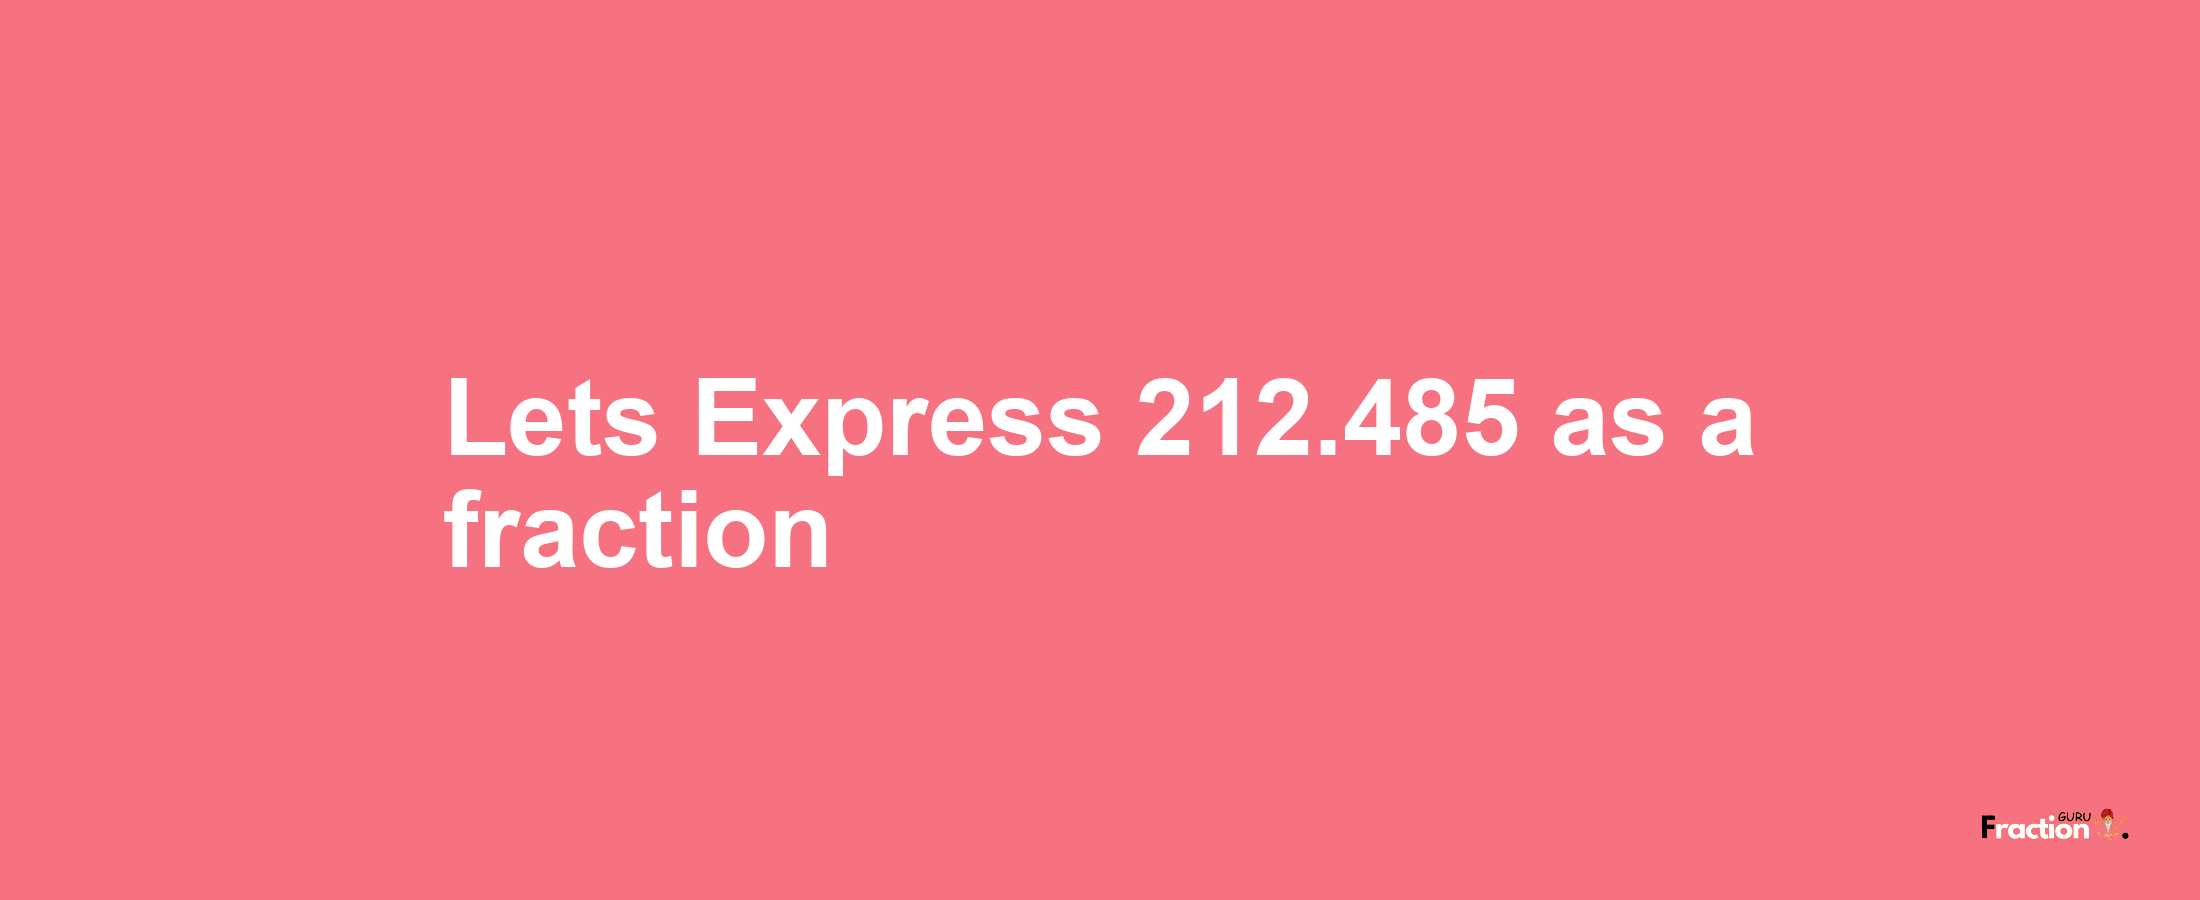 Lets Express 212.485 as afraction